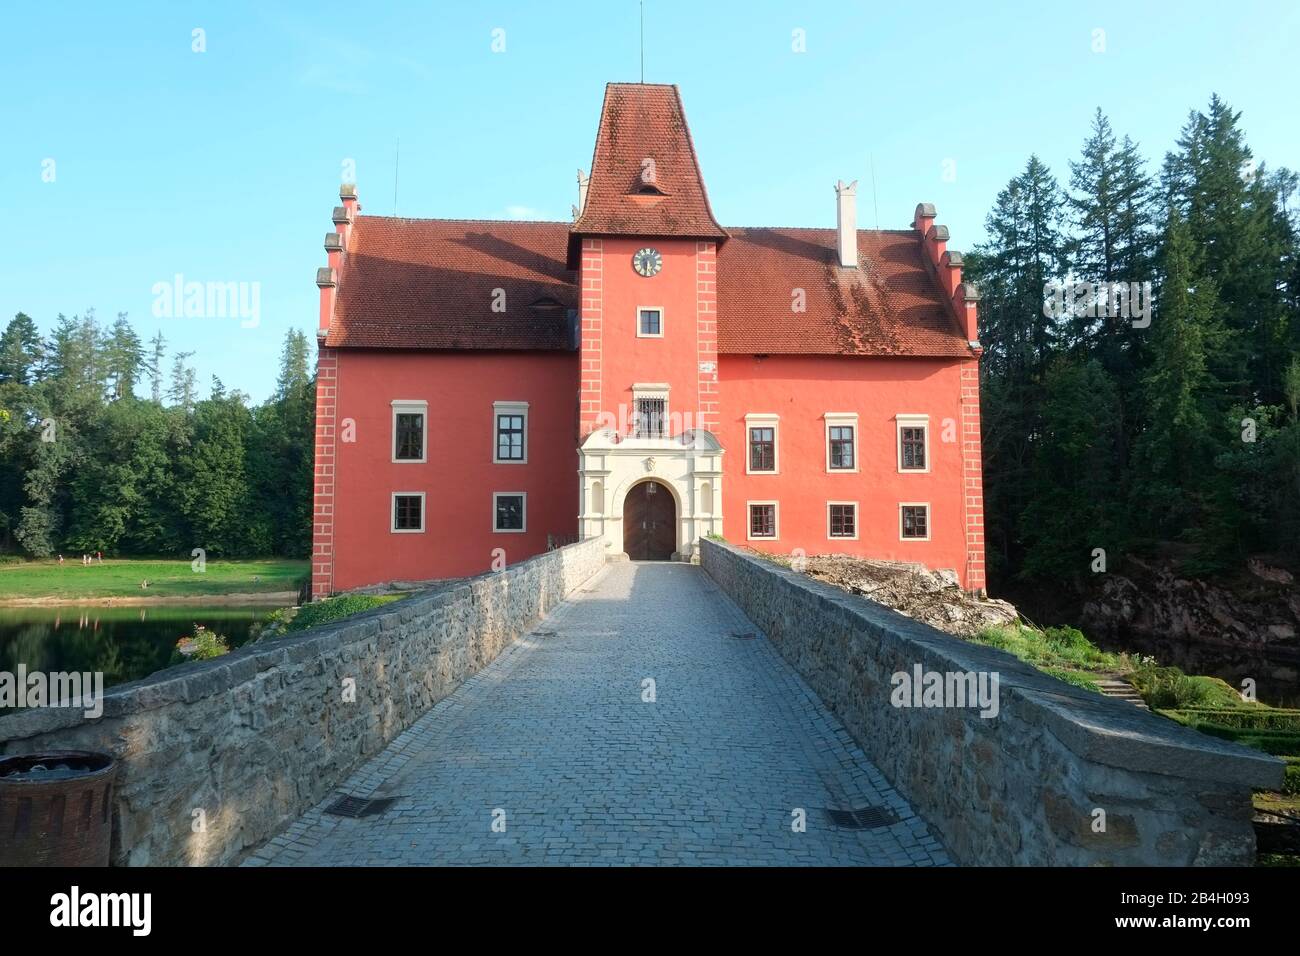 Cervena Lhota Chateau, Czech Republic. The summer house rebuilt from the Gothic fort in the 16th century was a place of amusement, celebrations and leisure. Stock Photo